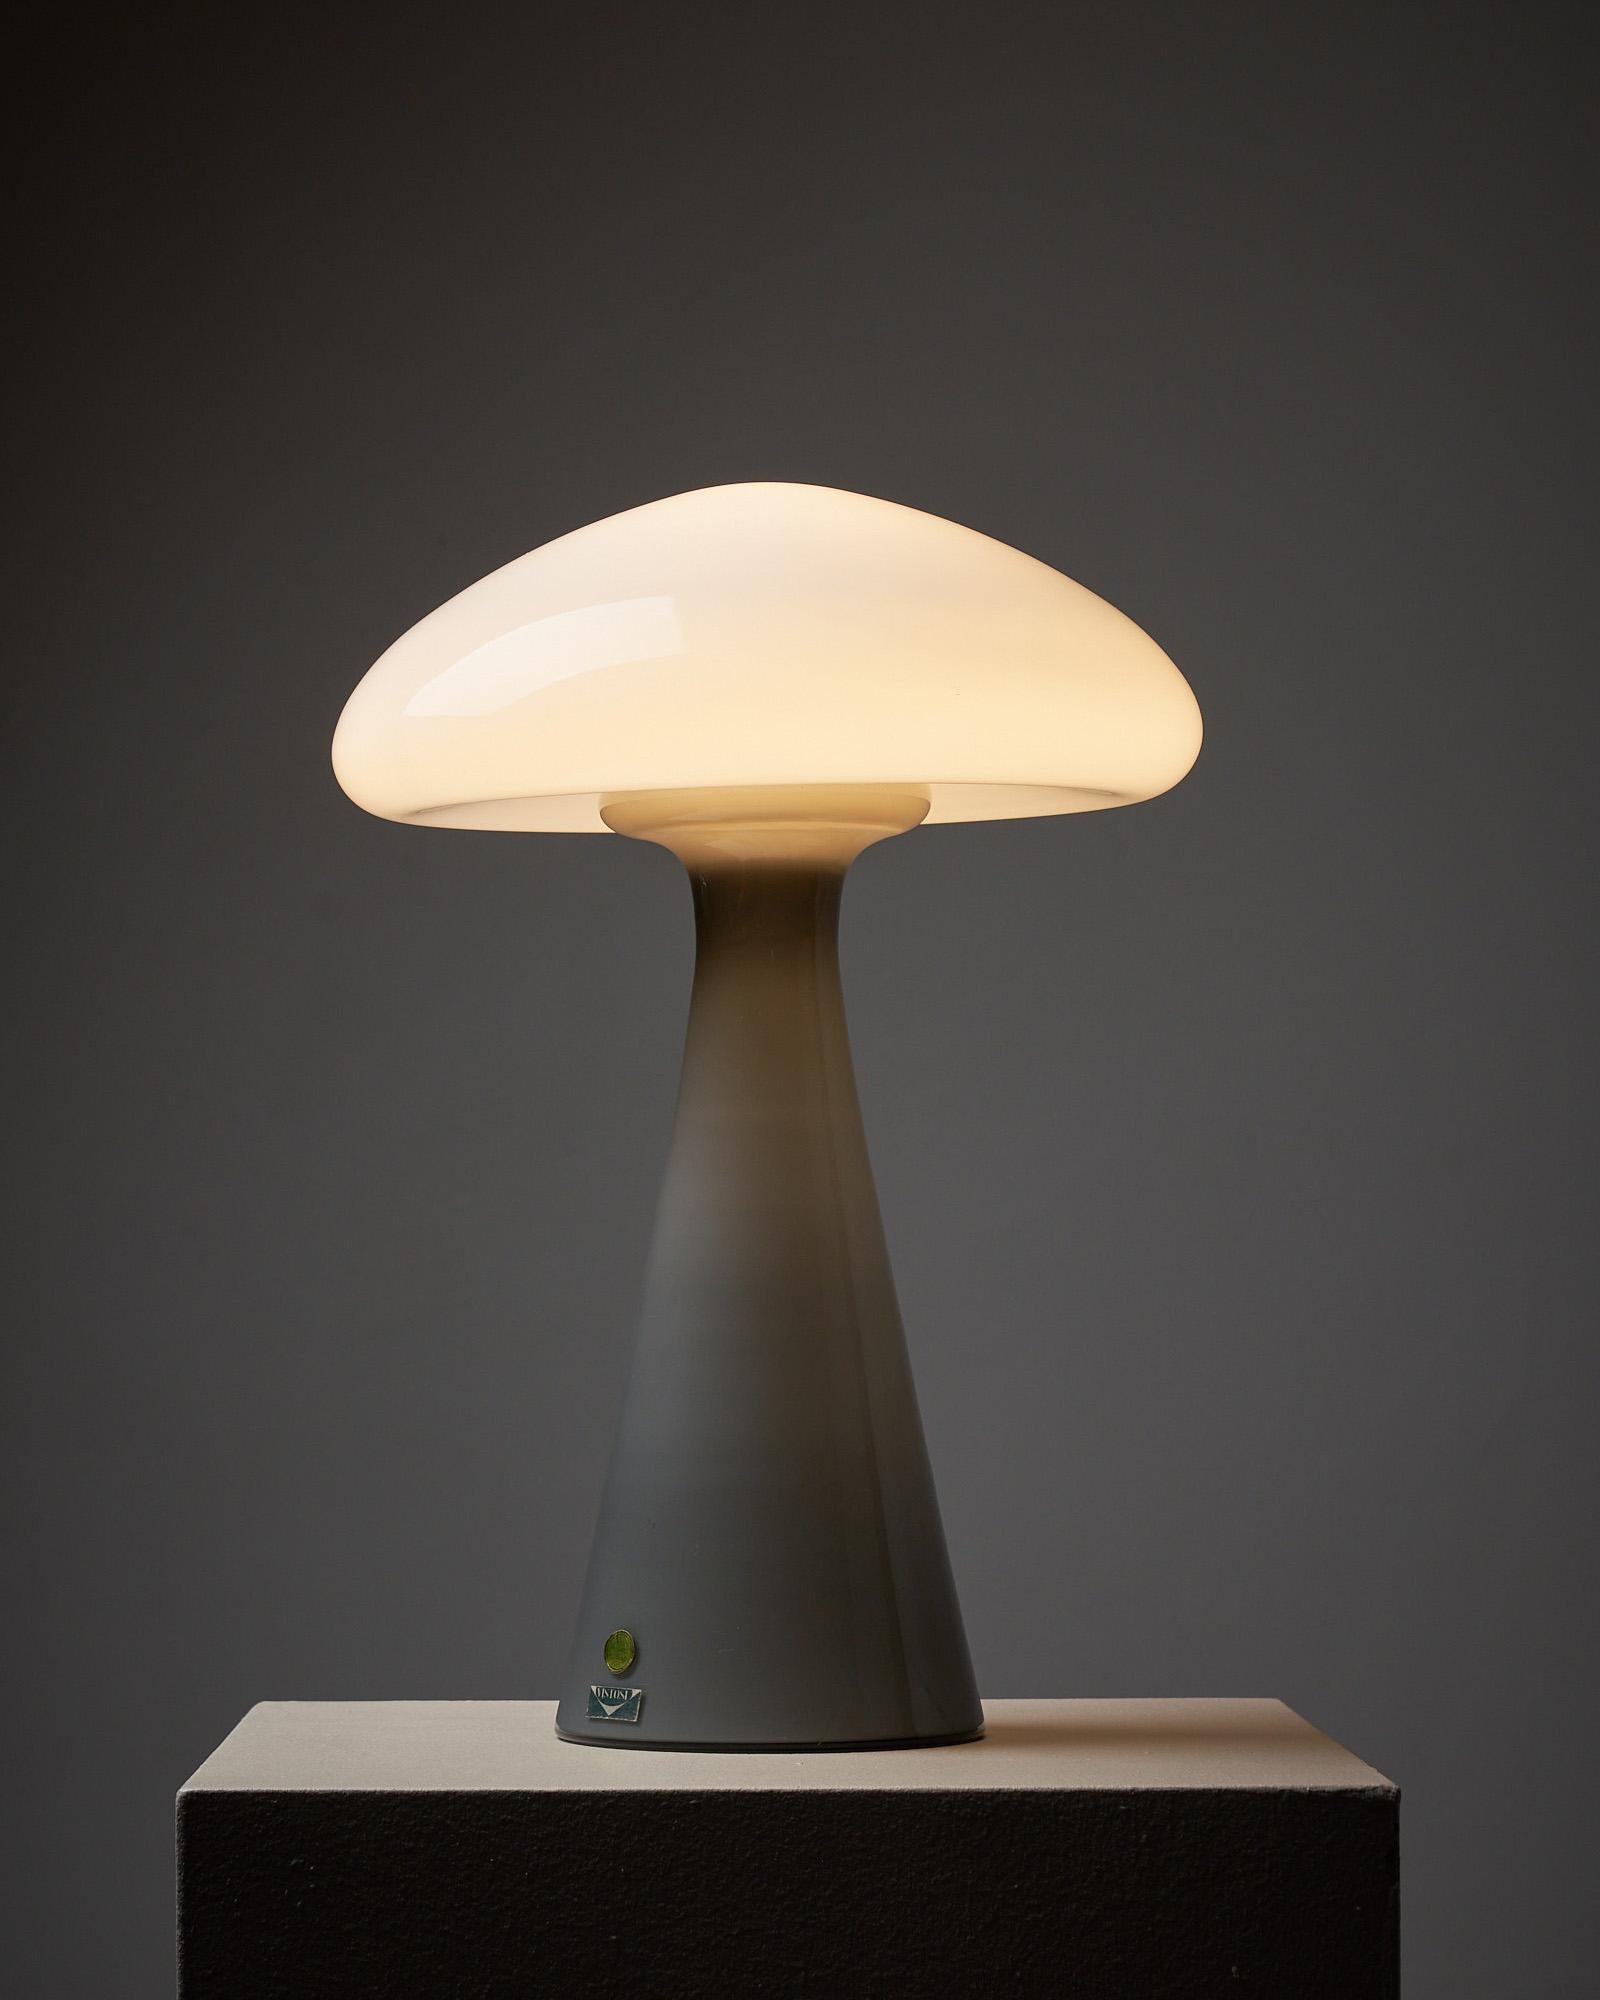 Introducing a unique table lamp by Vistosi, showcasing exceptional craftsmanship and design. This striking piece features a grey glass bottom and a white glass top that, when combined, resemble a mushroom form. The exquisite craftsmanship by Vistosi